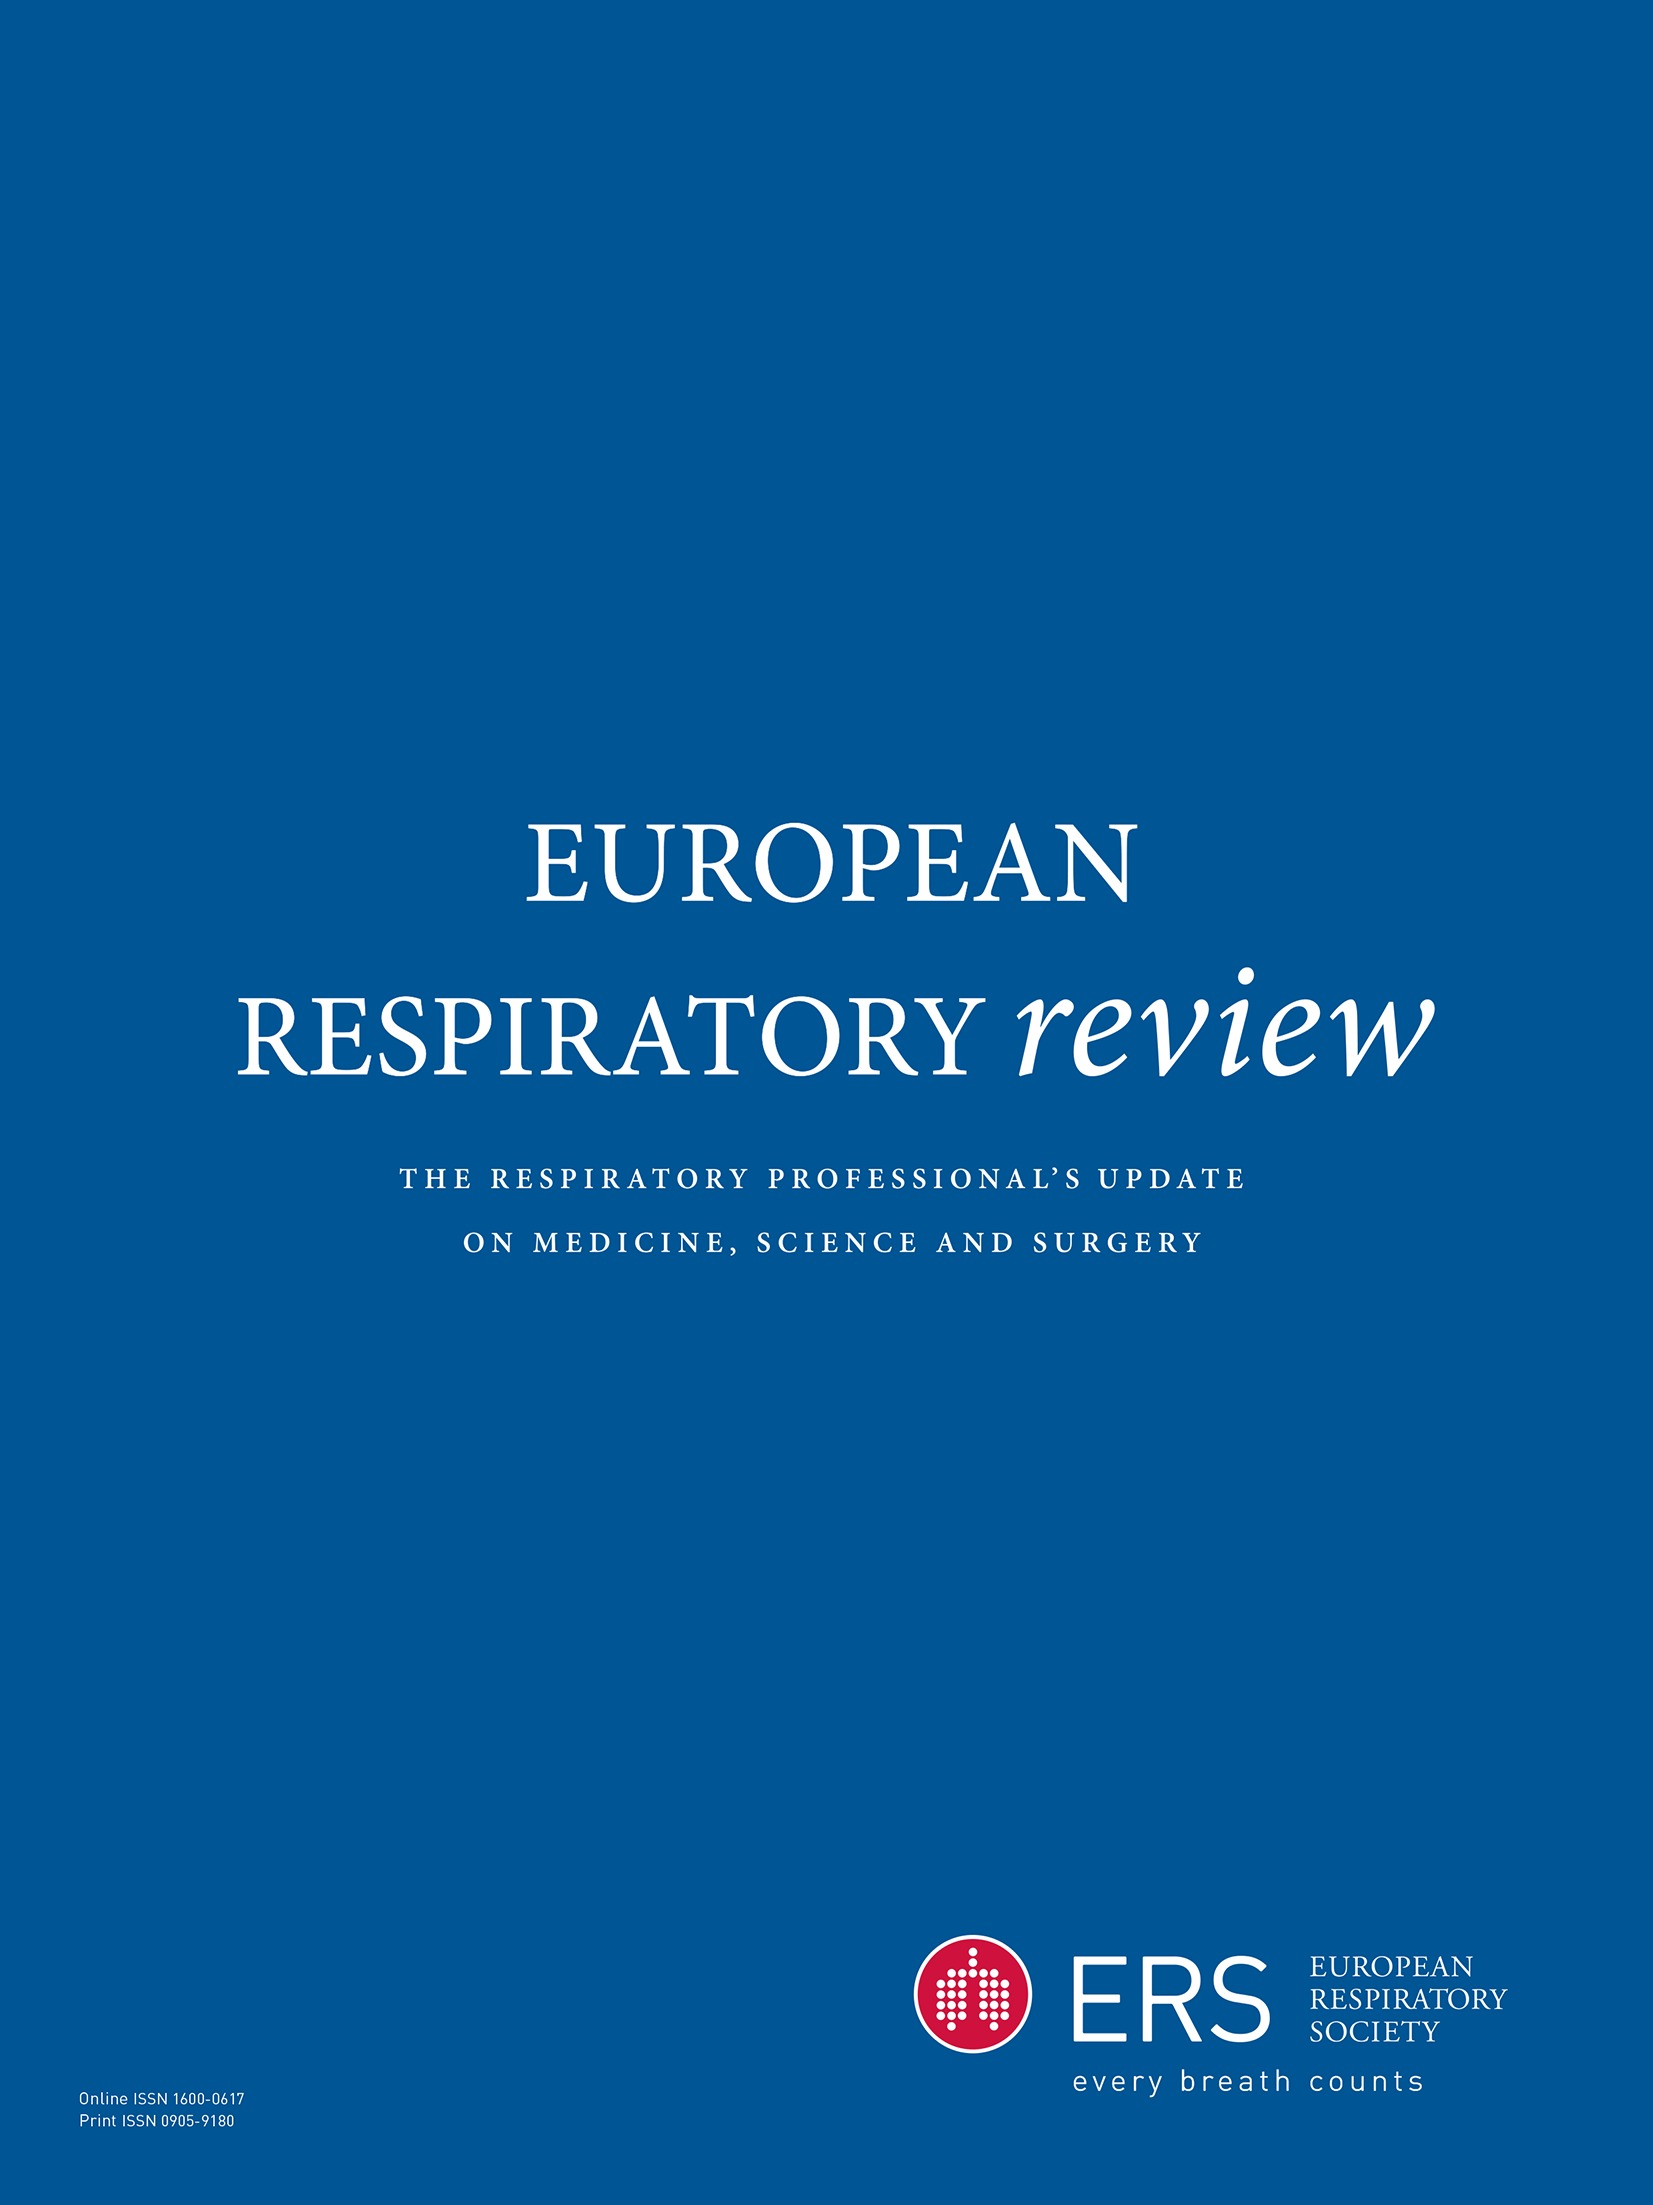 Nocturnal oxygen therapy in obstructive sleep apnoea: a systematic review and meta-analysis